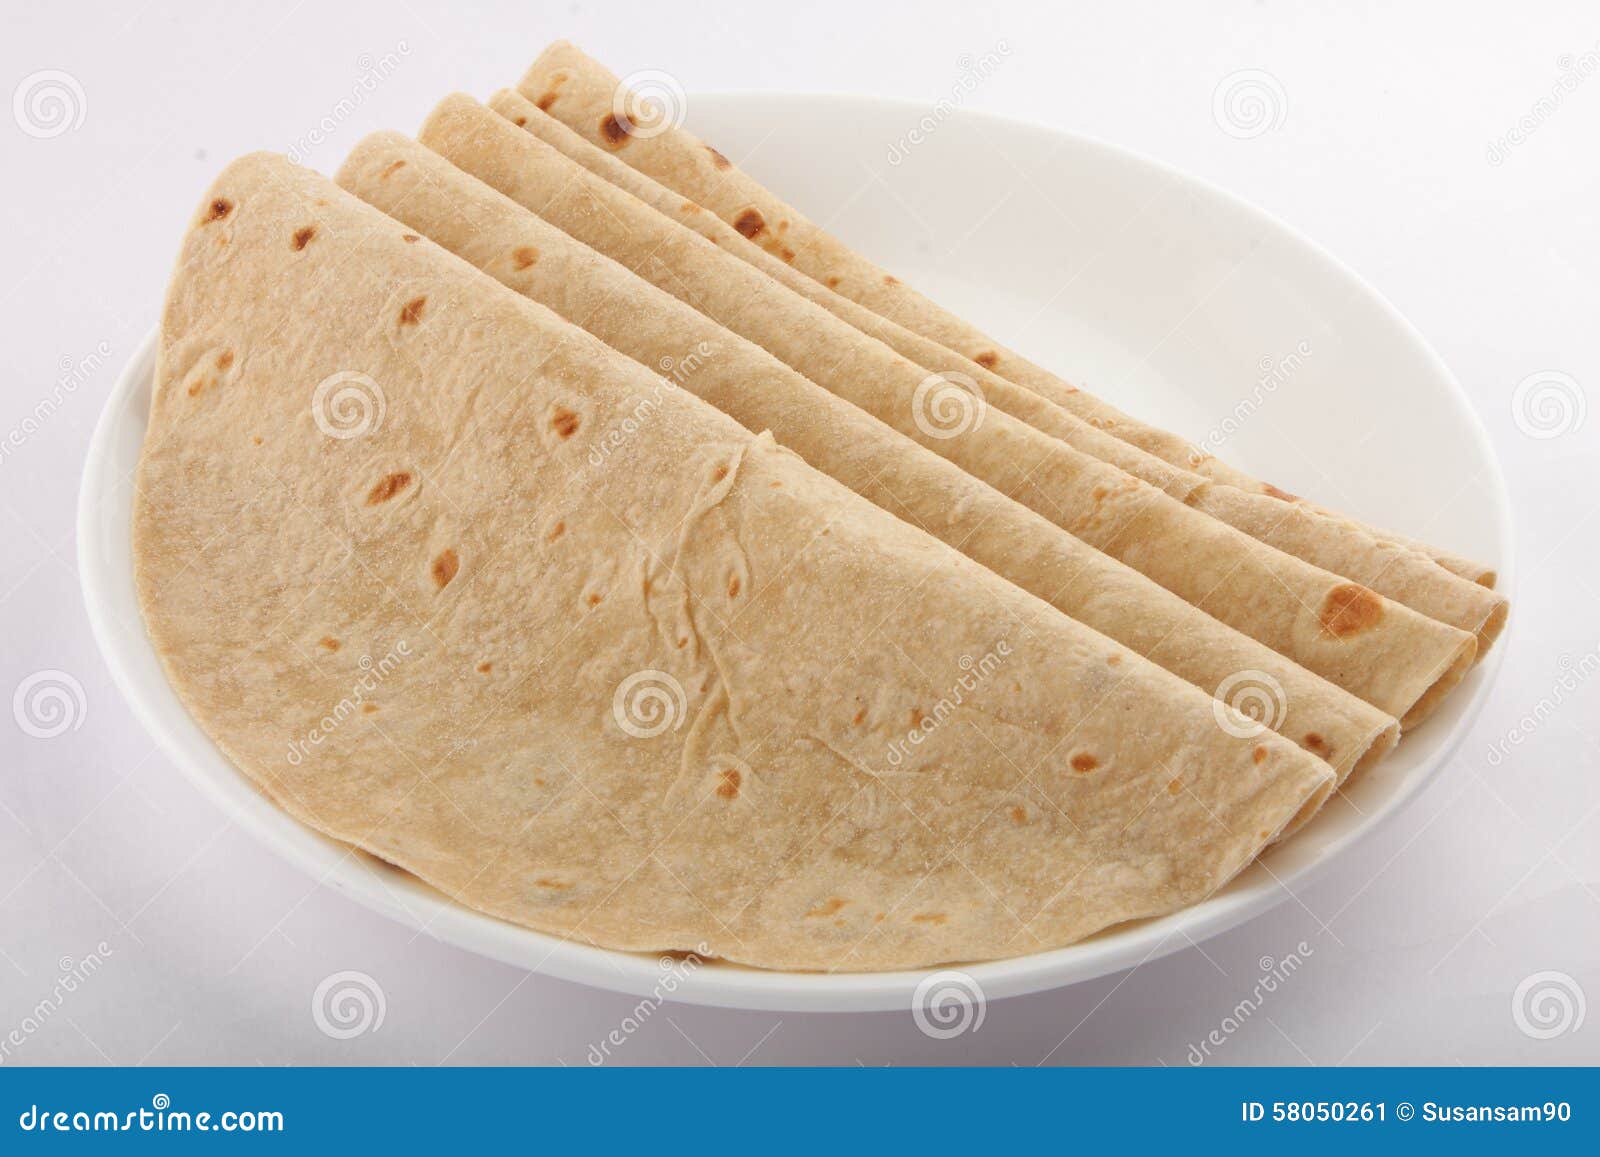 tasty chapati made of wheat flour.